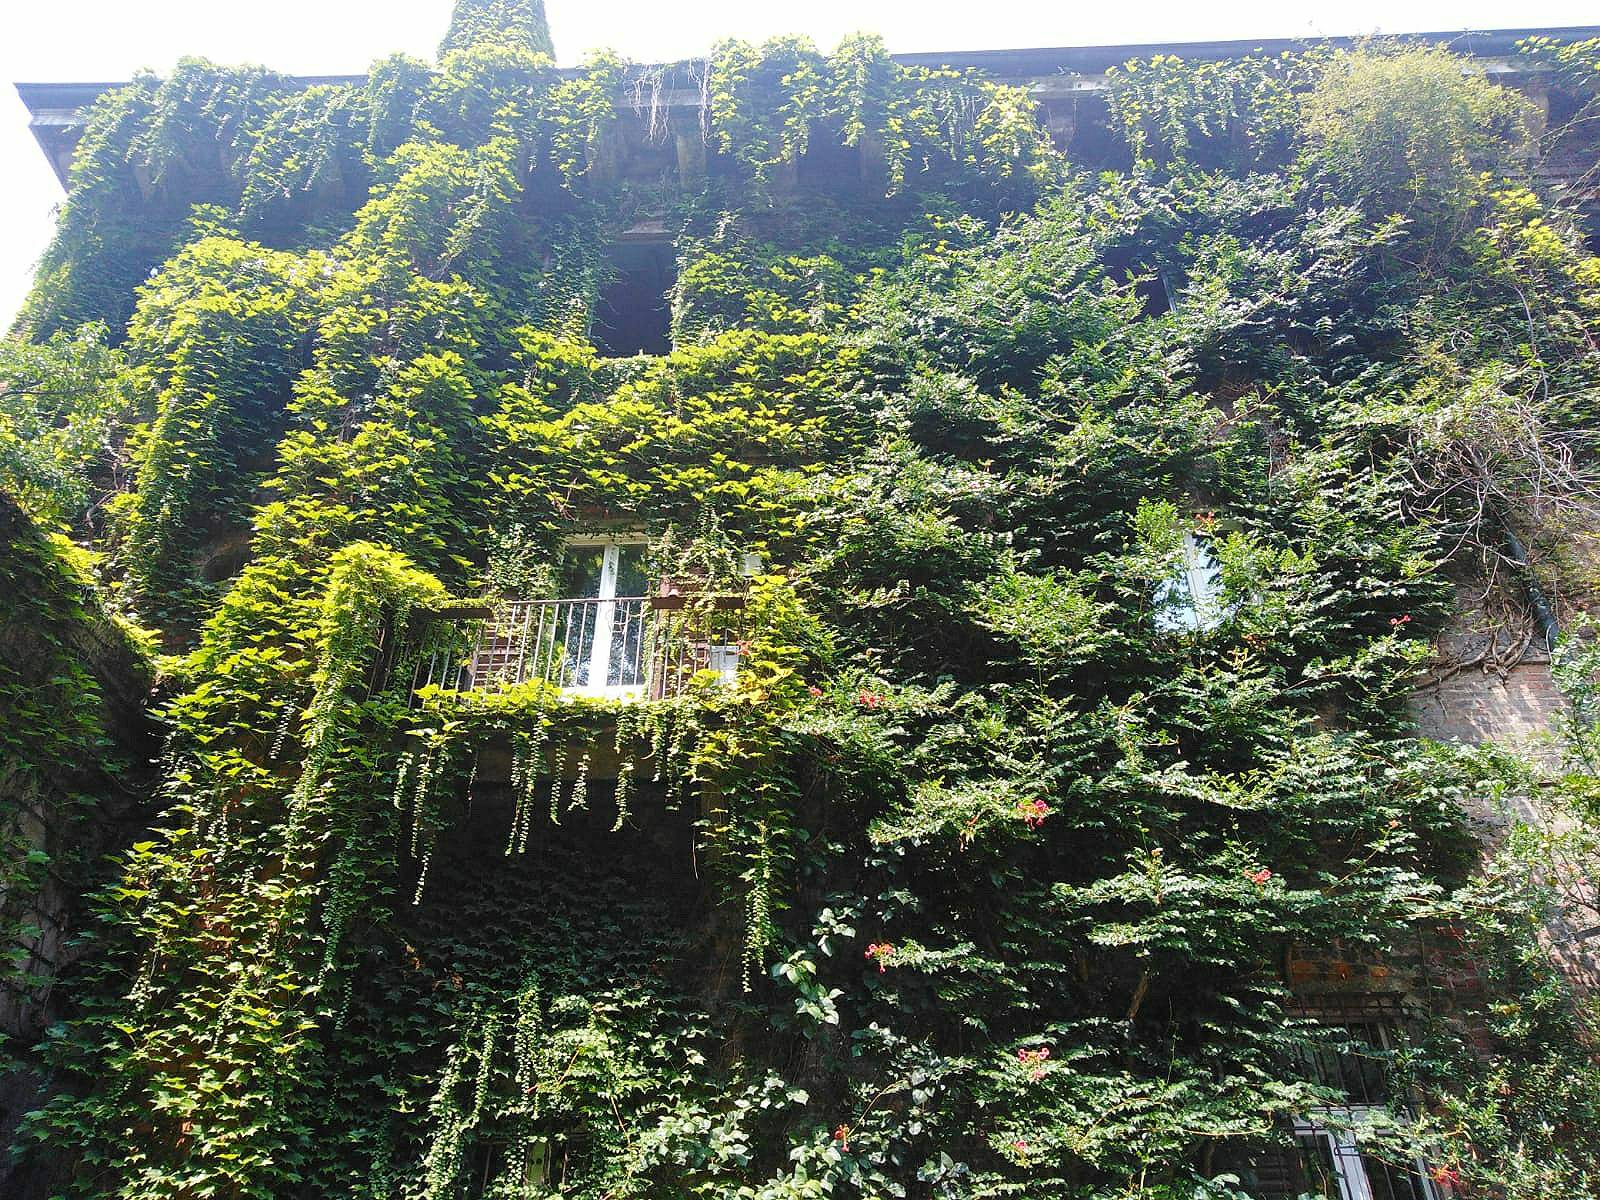 A house wall completely overgrown with plants